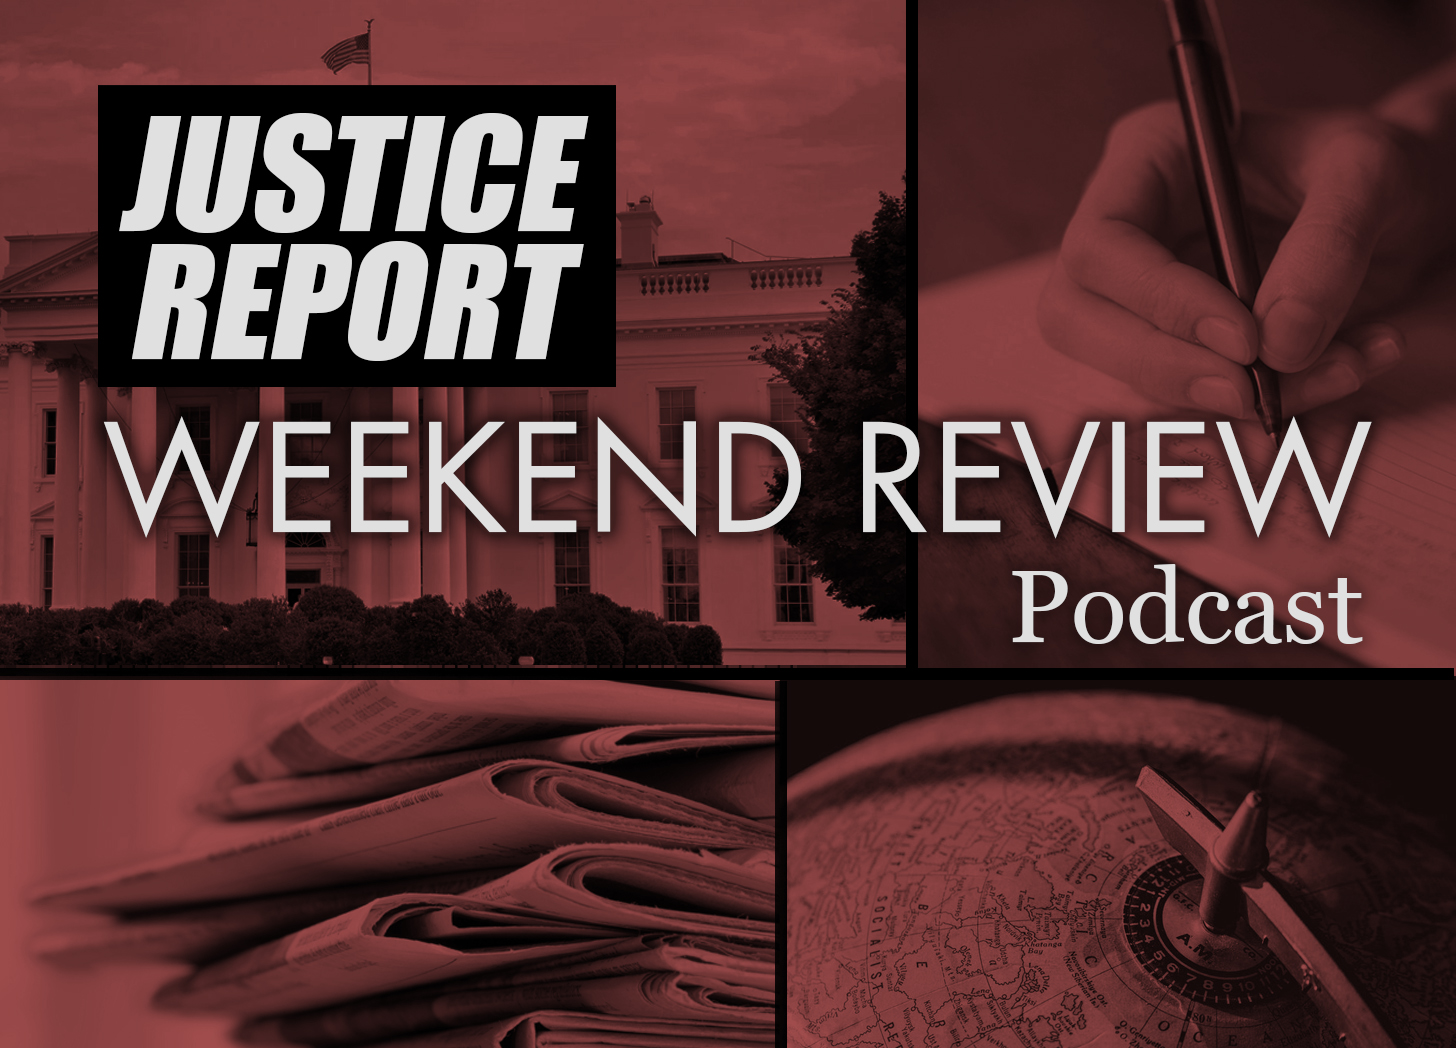 Justice Report Weekend Review #7